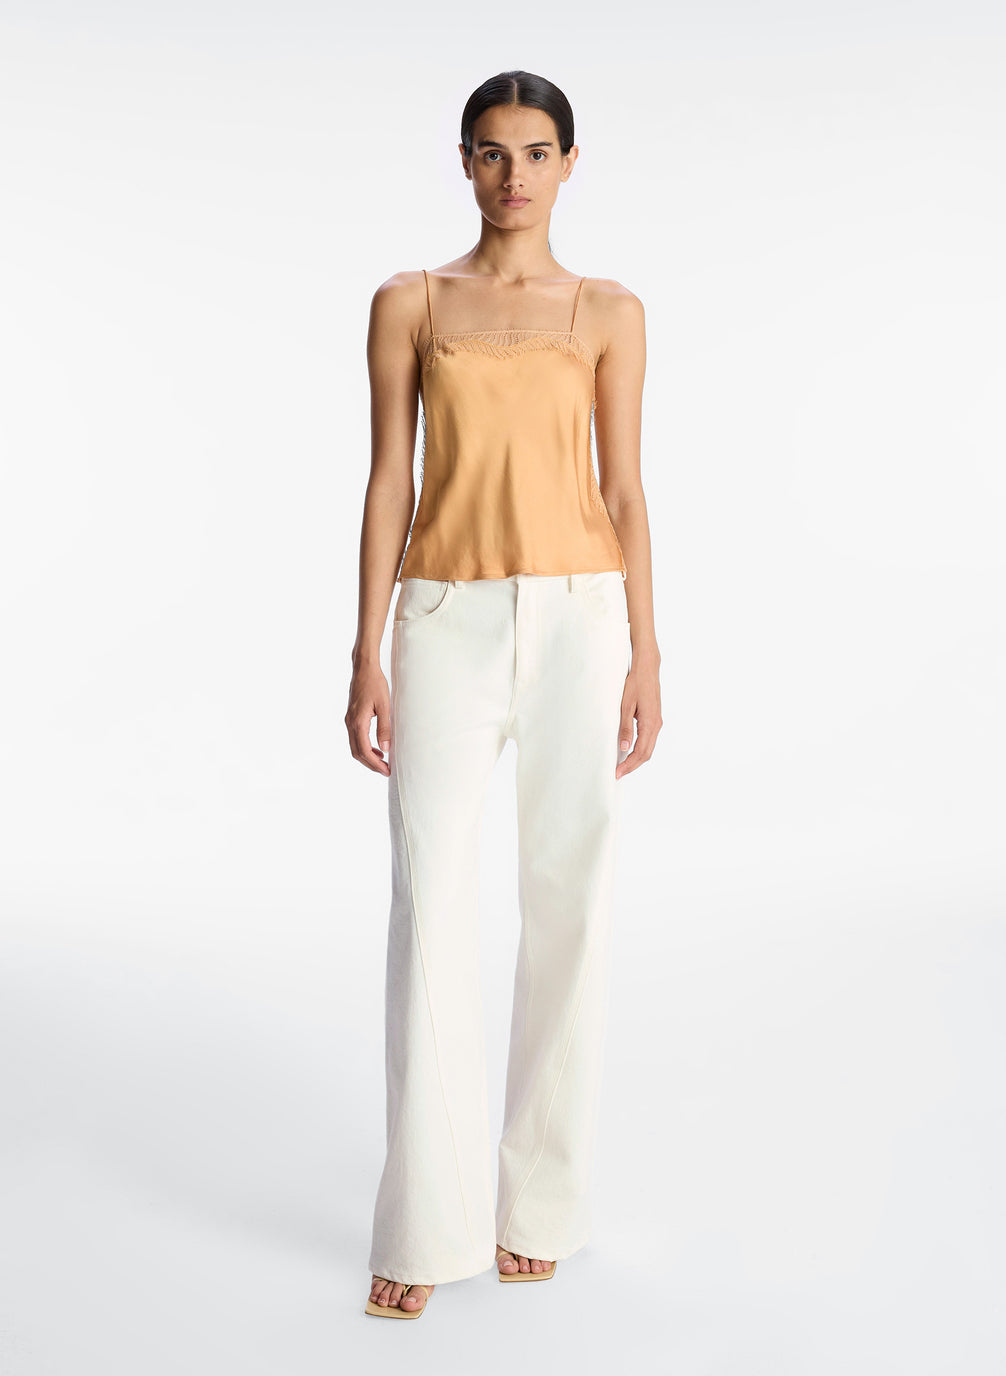 front view of woman wearing tan lace trim camisole and white pants